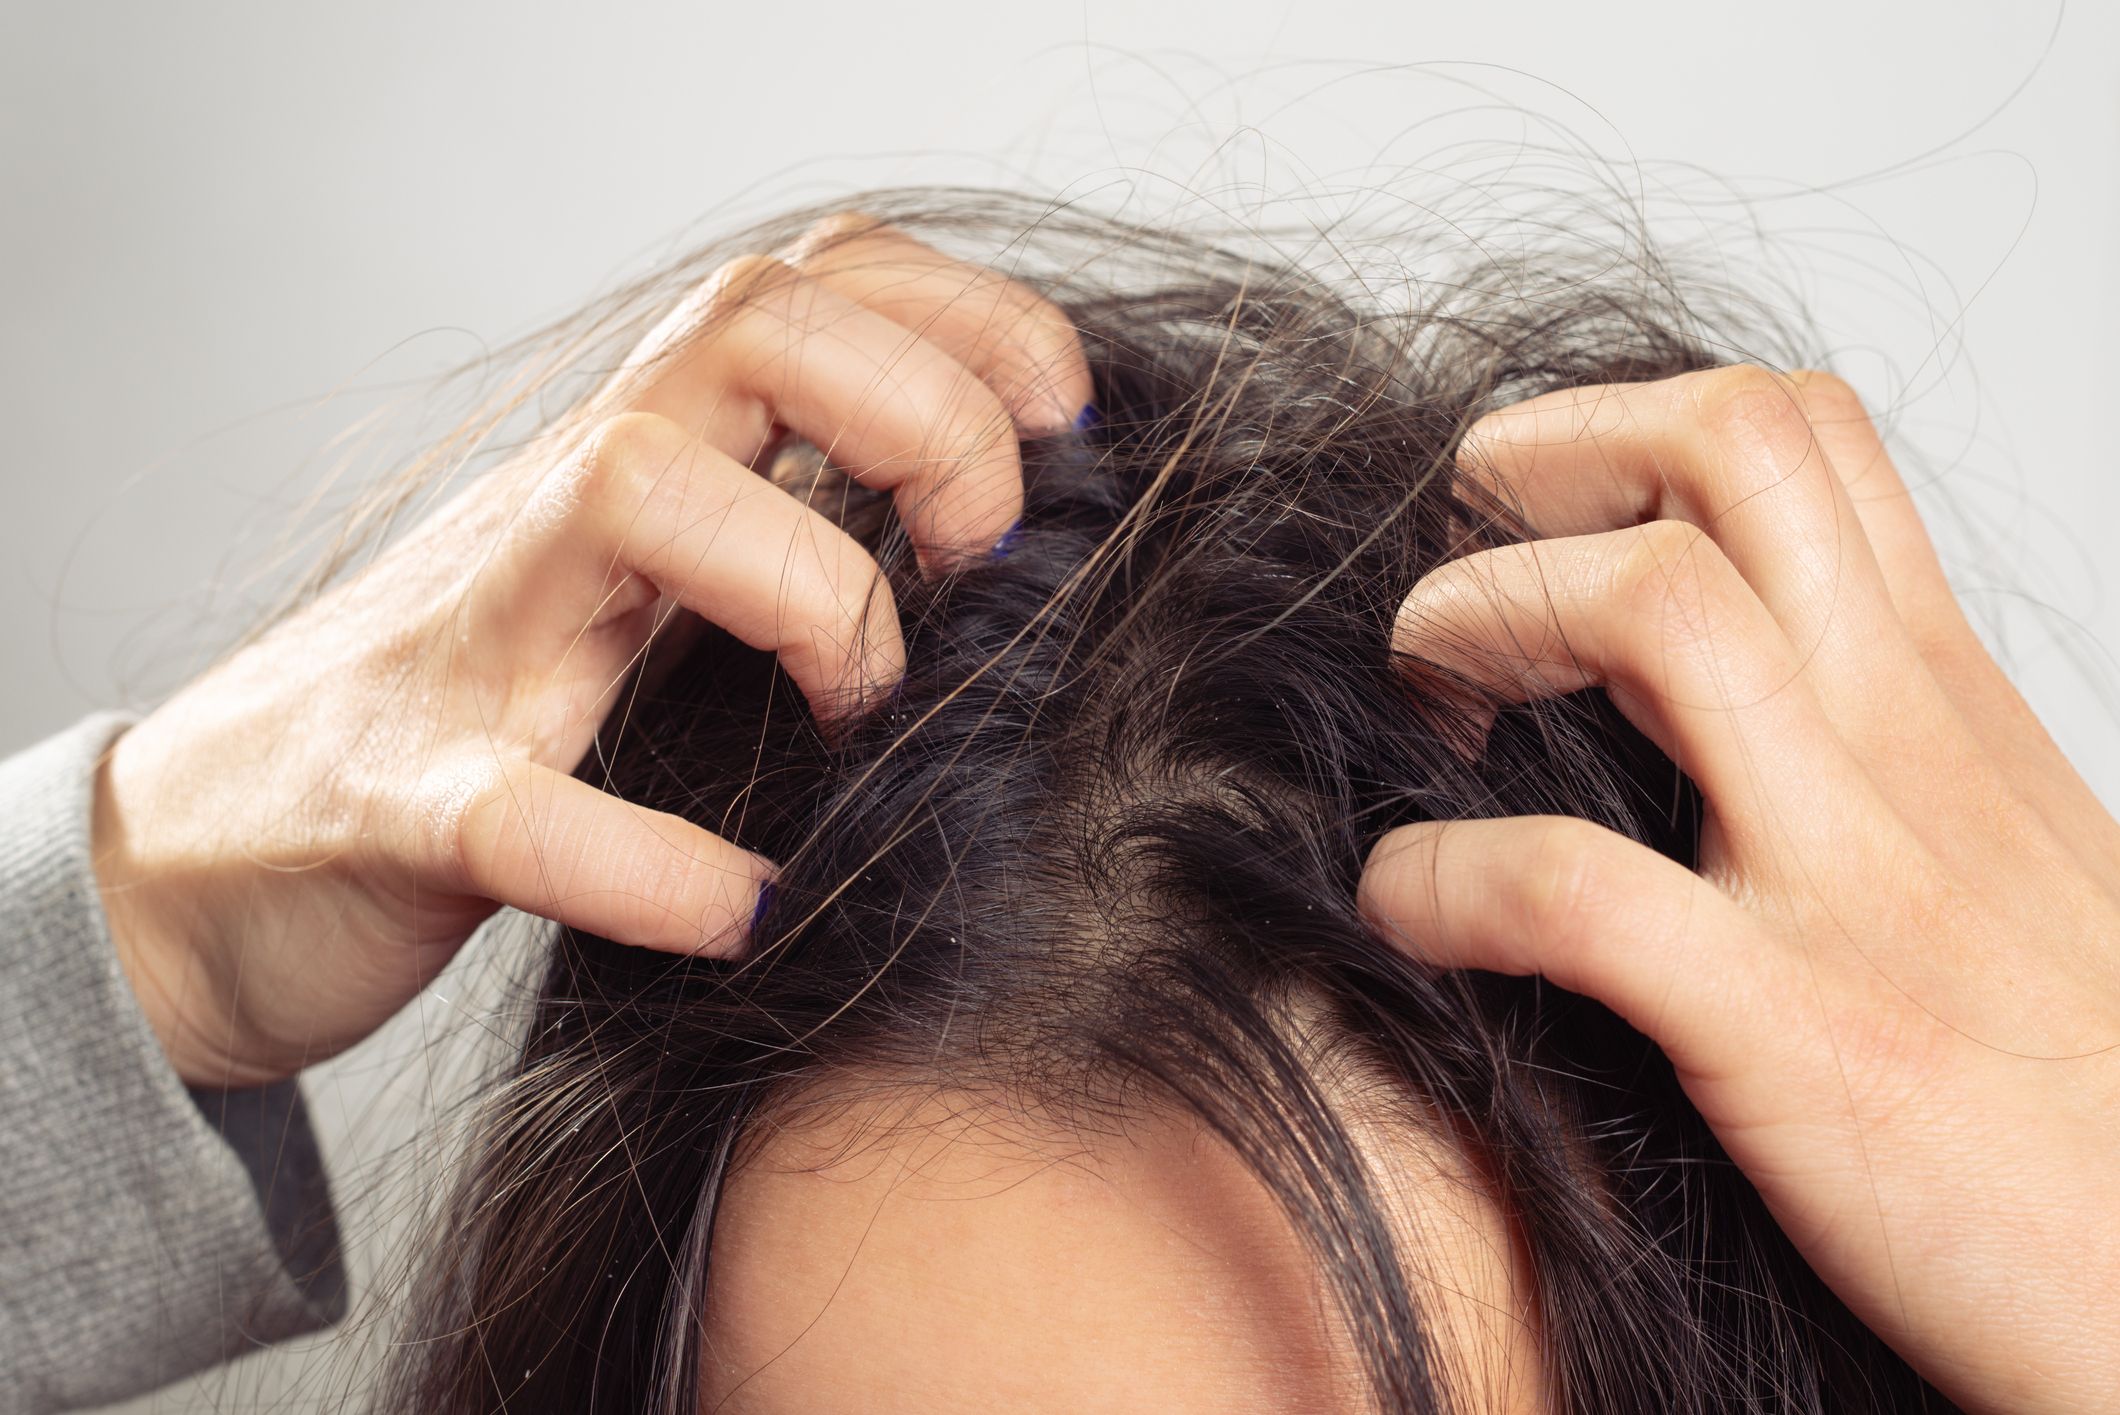 Itchy scalp treatment with basic home remedies